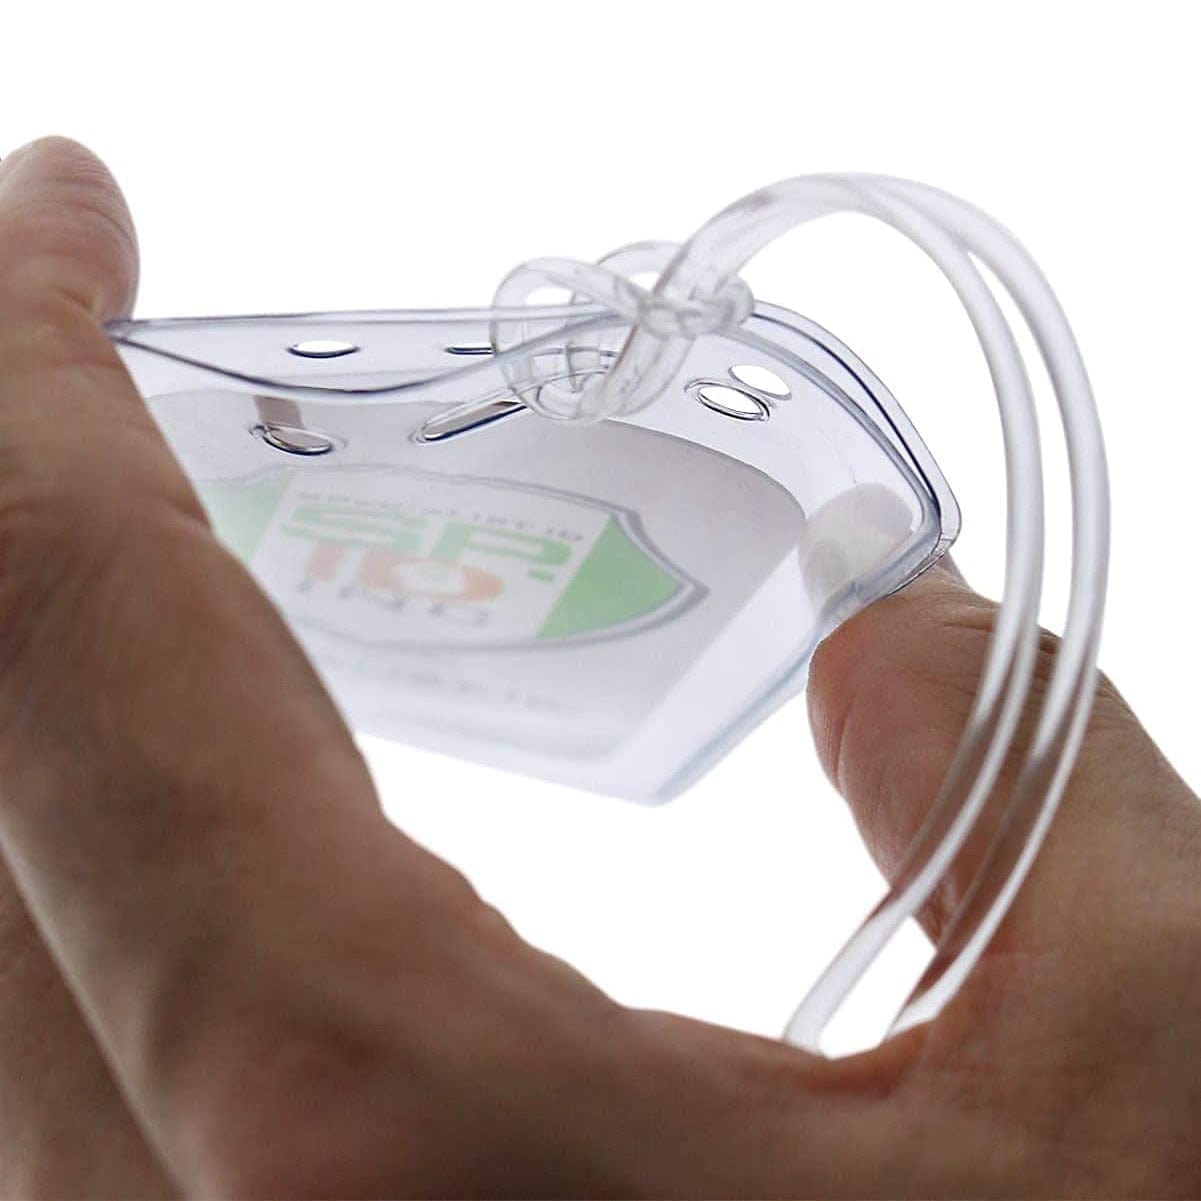 A close-up of a hand holding Clear Plastic Luggage Identification Tags with Loops Included - Business Card or Photo Insert (Locking Top) with secure loops and a transparent lanyard attached through two holes at the top, resembling those on luggage tags.